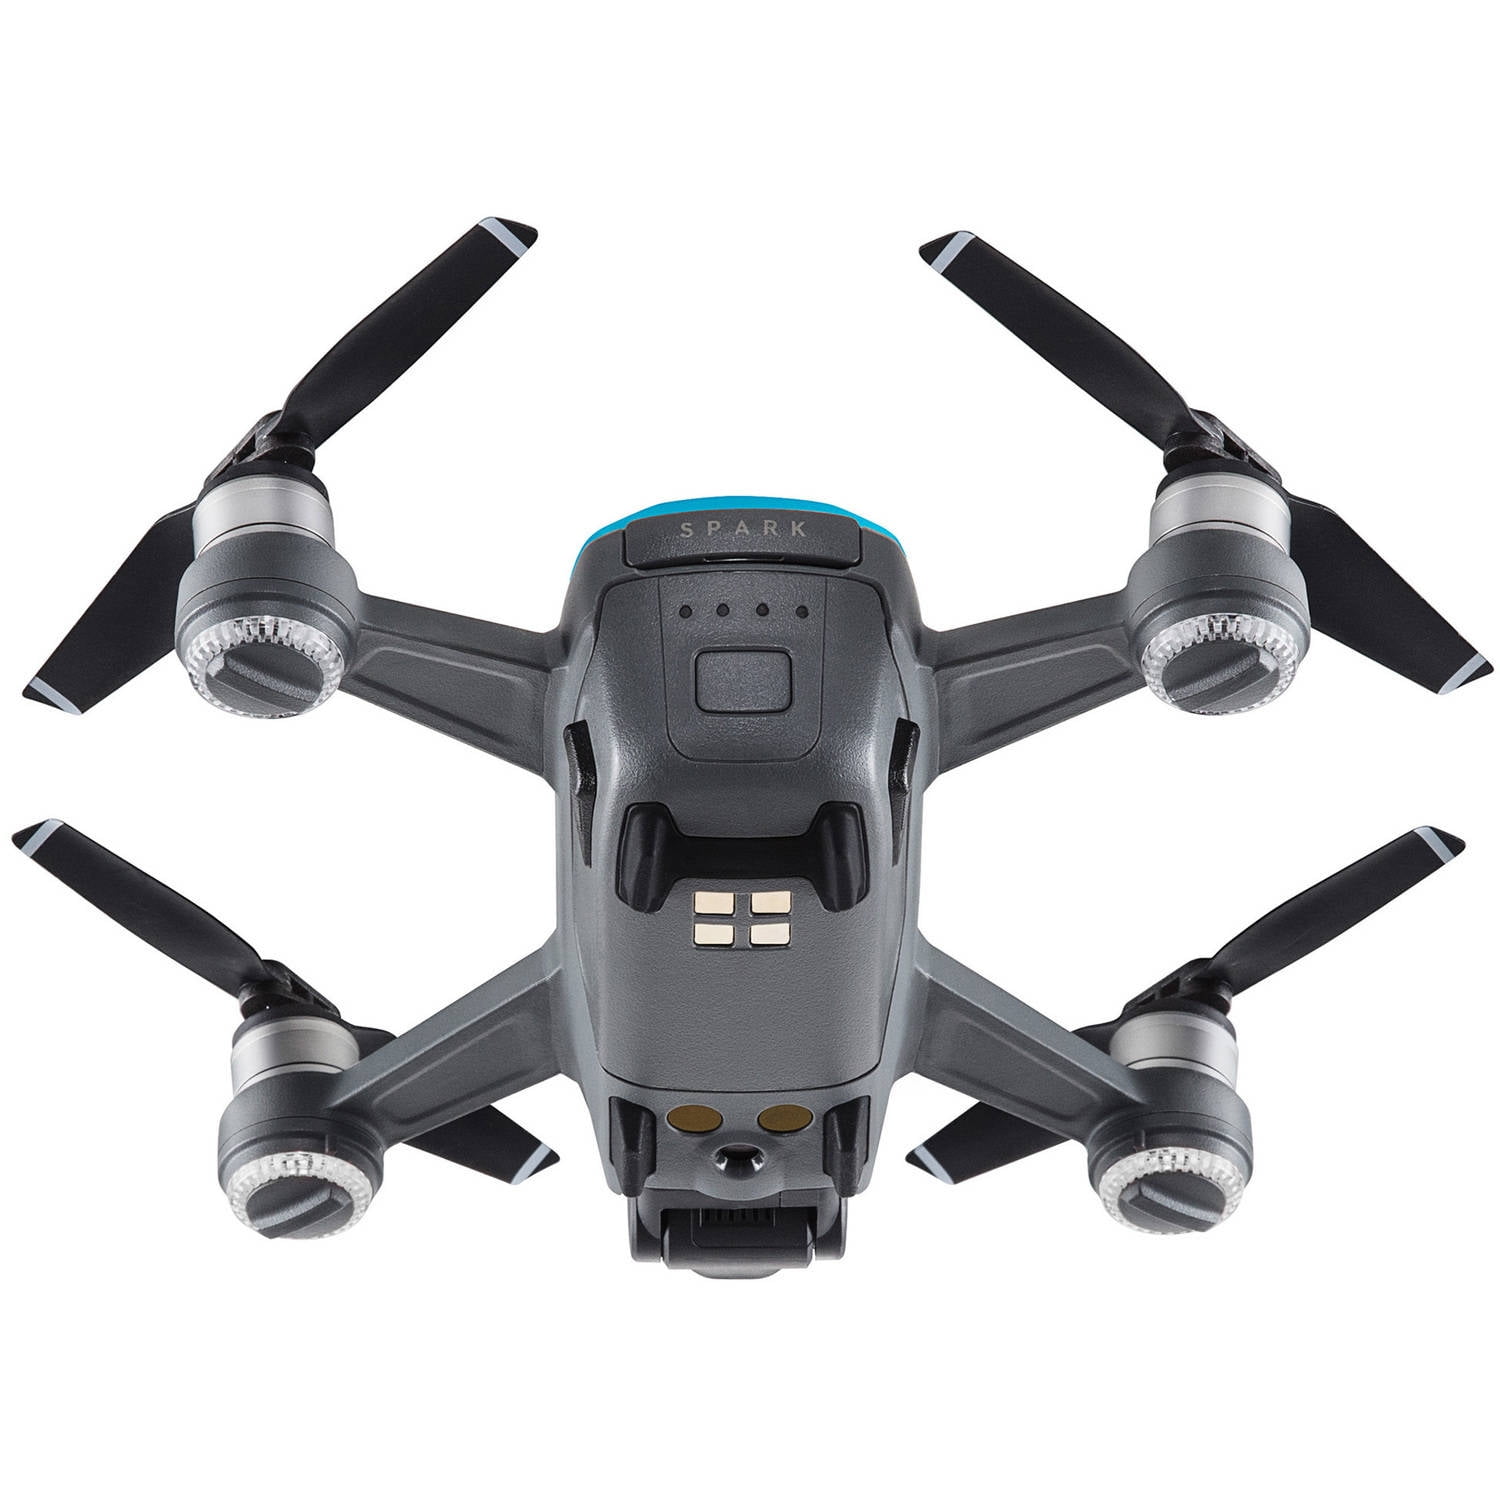 dji spark green fly more combo